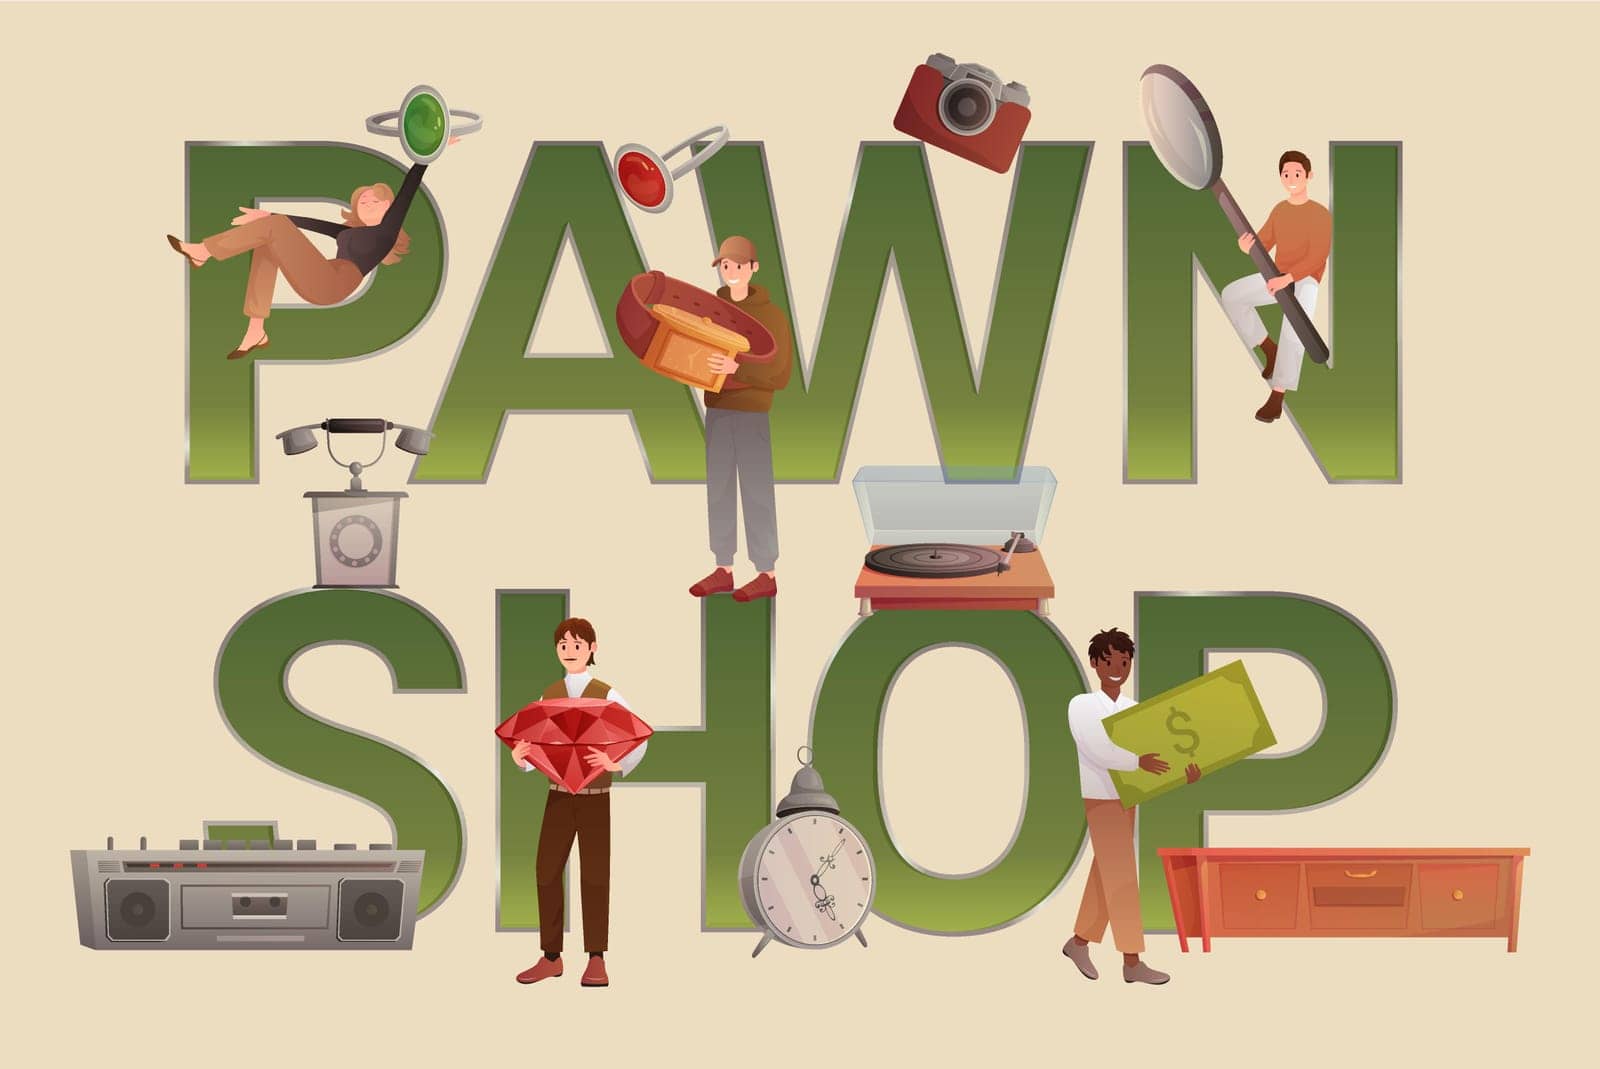 Pawnshop banner, poster design. Tiny people buy and sell antique or jewelry in store of pawnbroker, holding expensive item and magnifying glass near text of Pawn shop, cartoon vector illustration